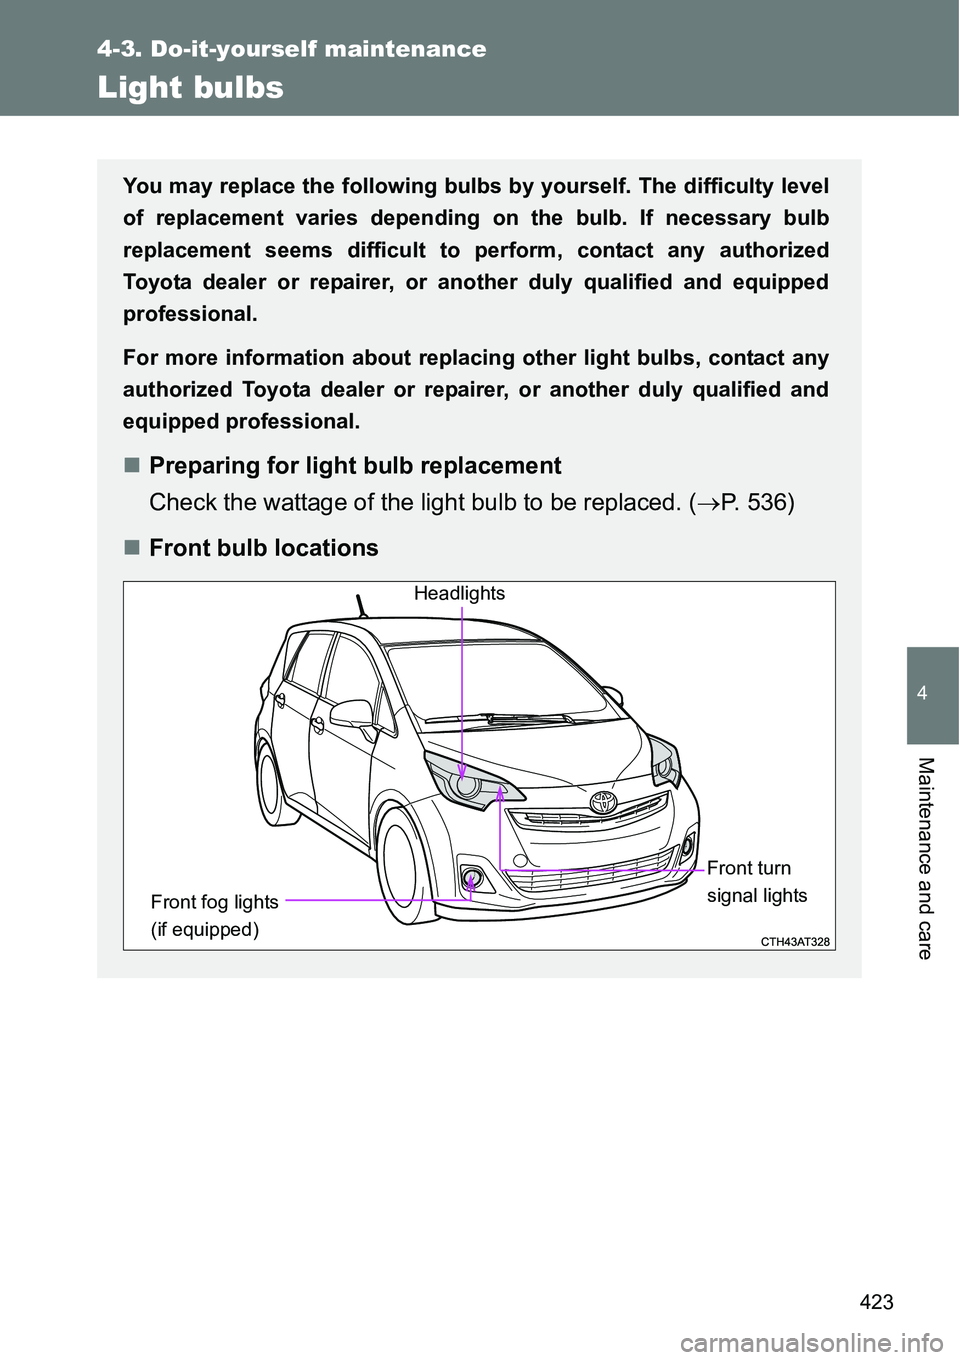 TOYOTA VERSO S 2015  Owners Manual 423
4-3. Do-it-yourself maintenance
4
Maintenance and care
Light bulbs
You may replace the following bulbs by yourself. The difficulty level
of replacement varies depending on the bulb. If necessary b